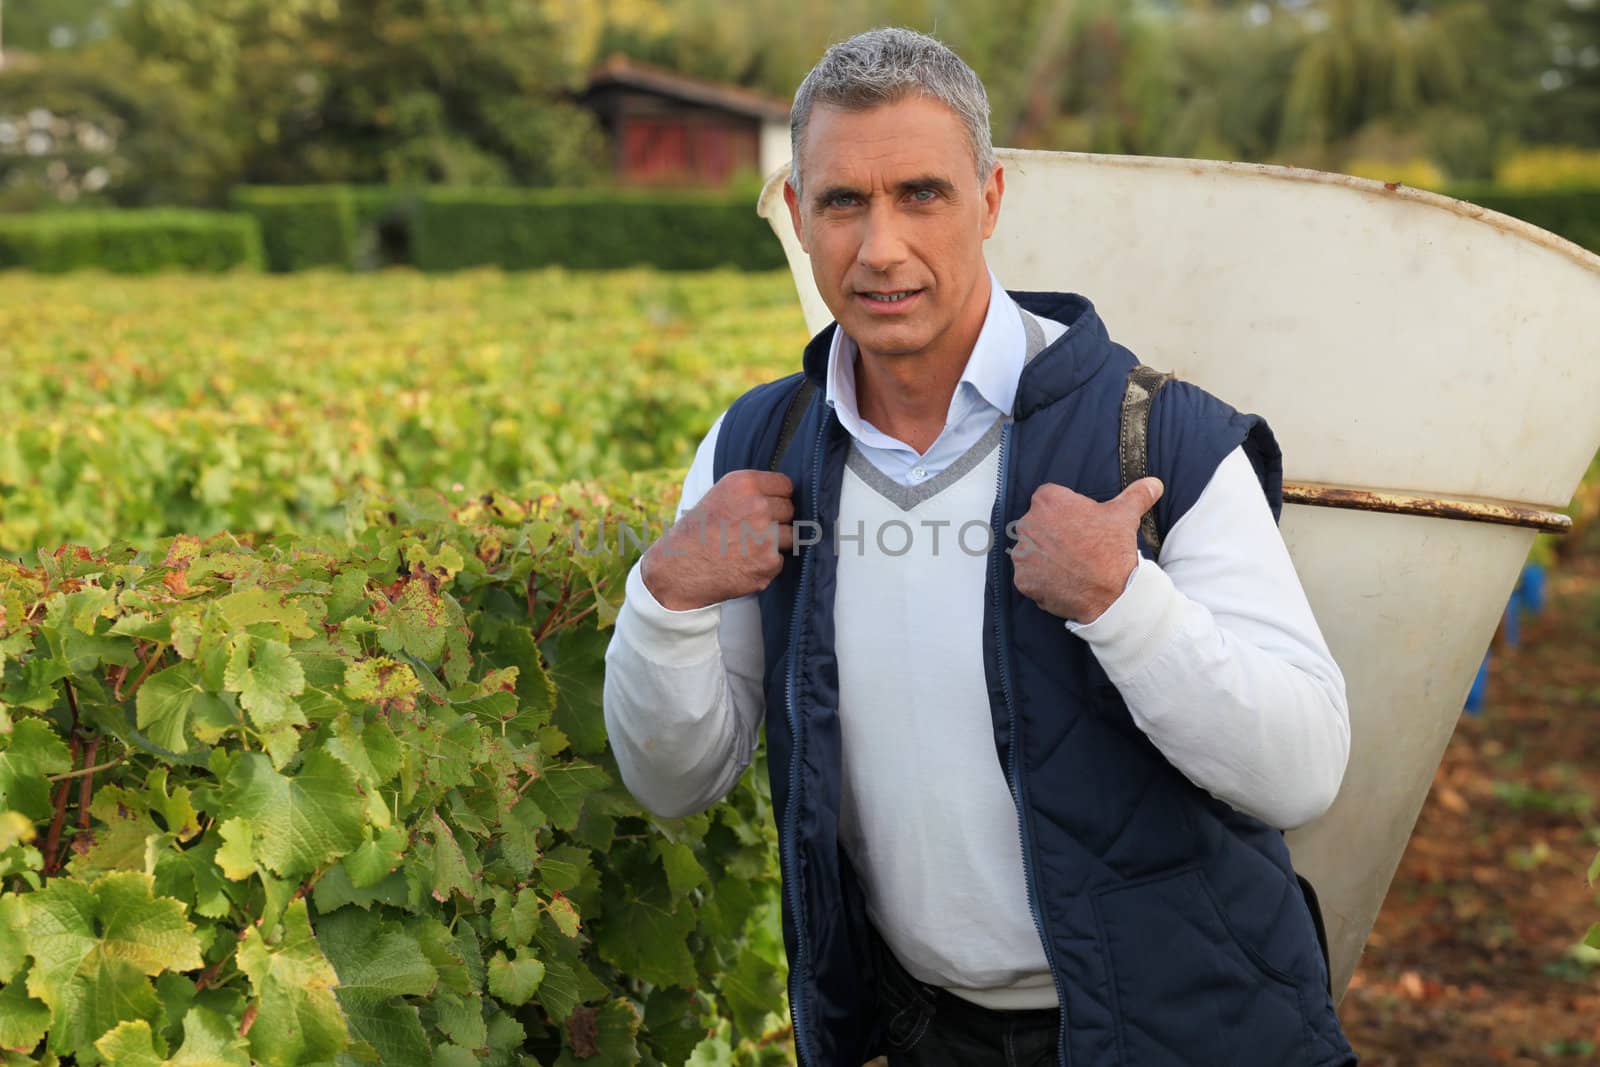 mature grape-picker carrying hod on his back by phovoir